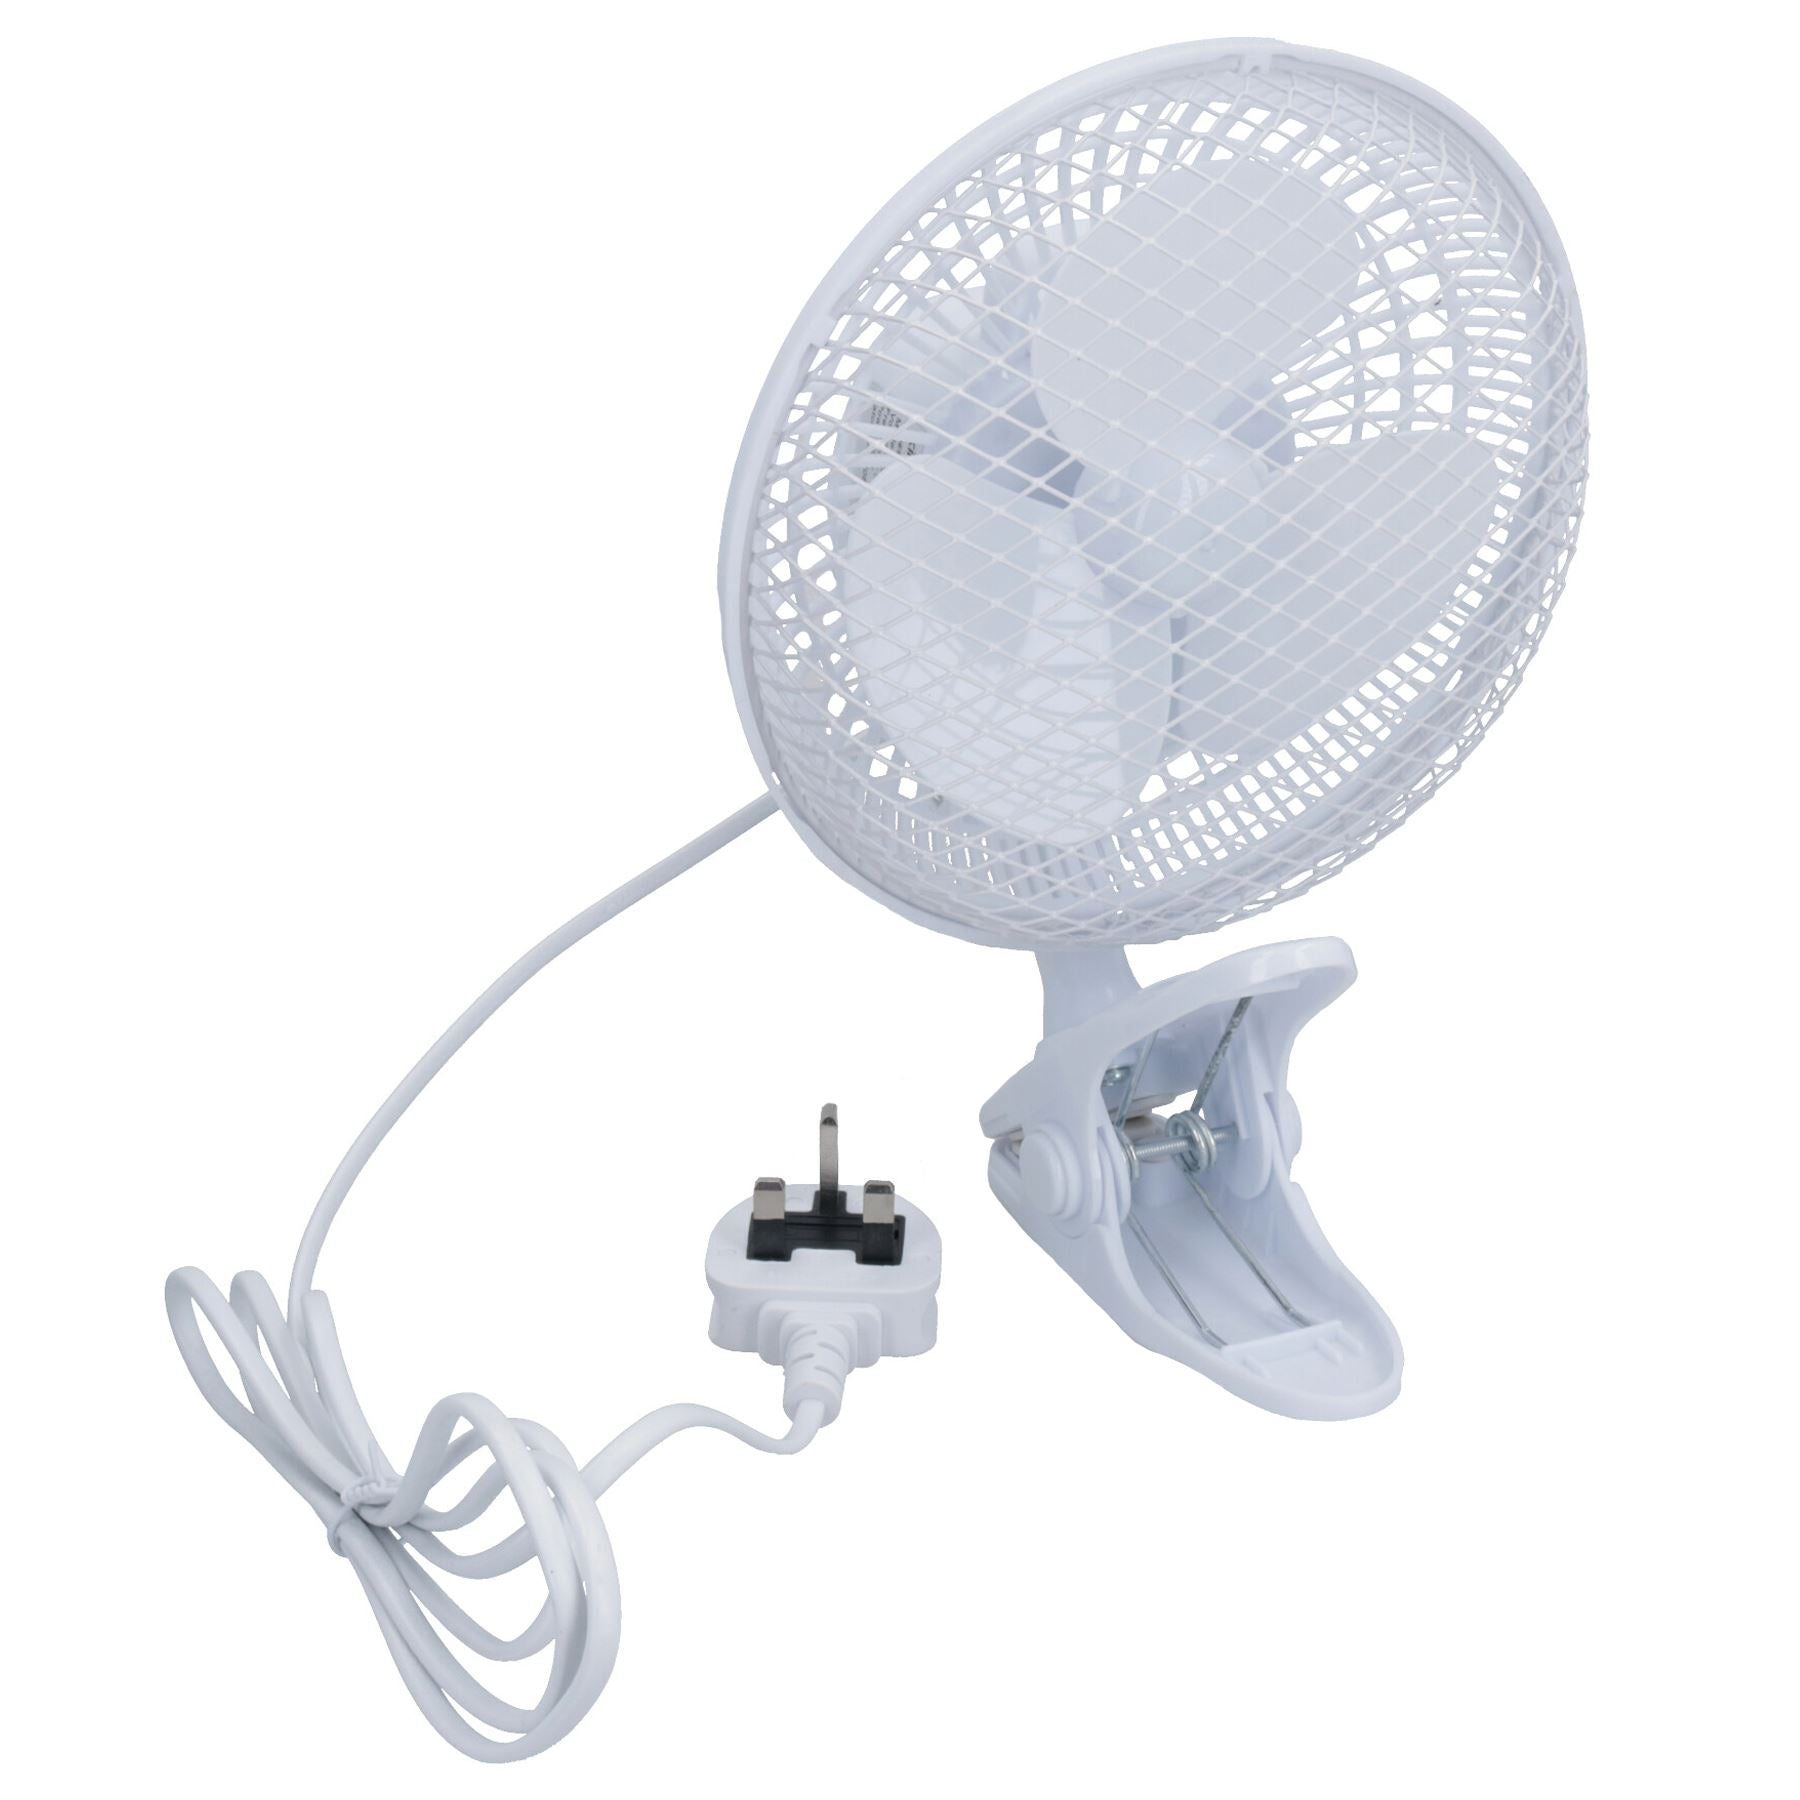 Portable 6” Desk Fan With Clip Cooling 2 Speed Home Office UK Plug